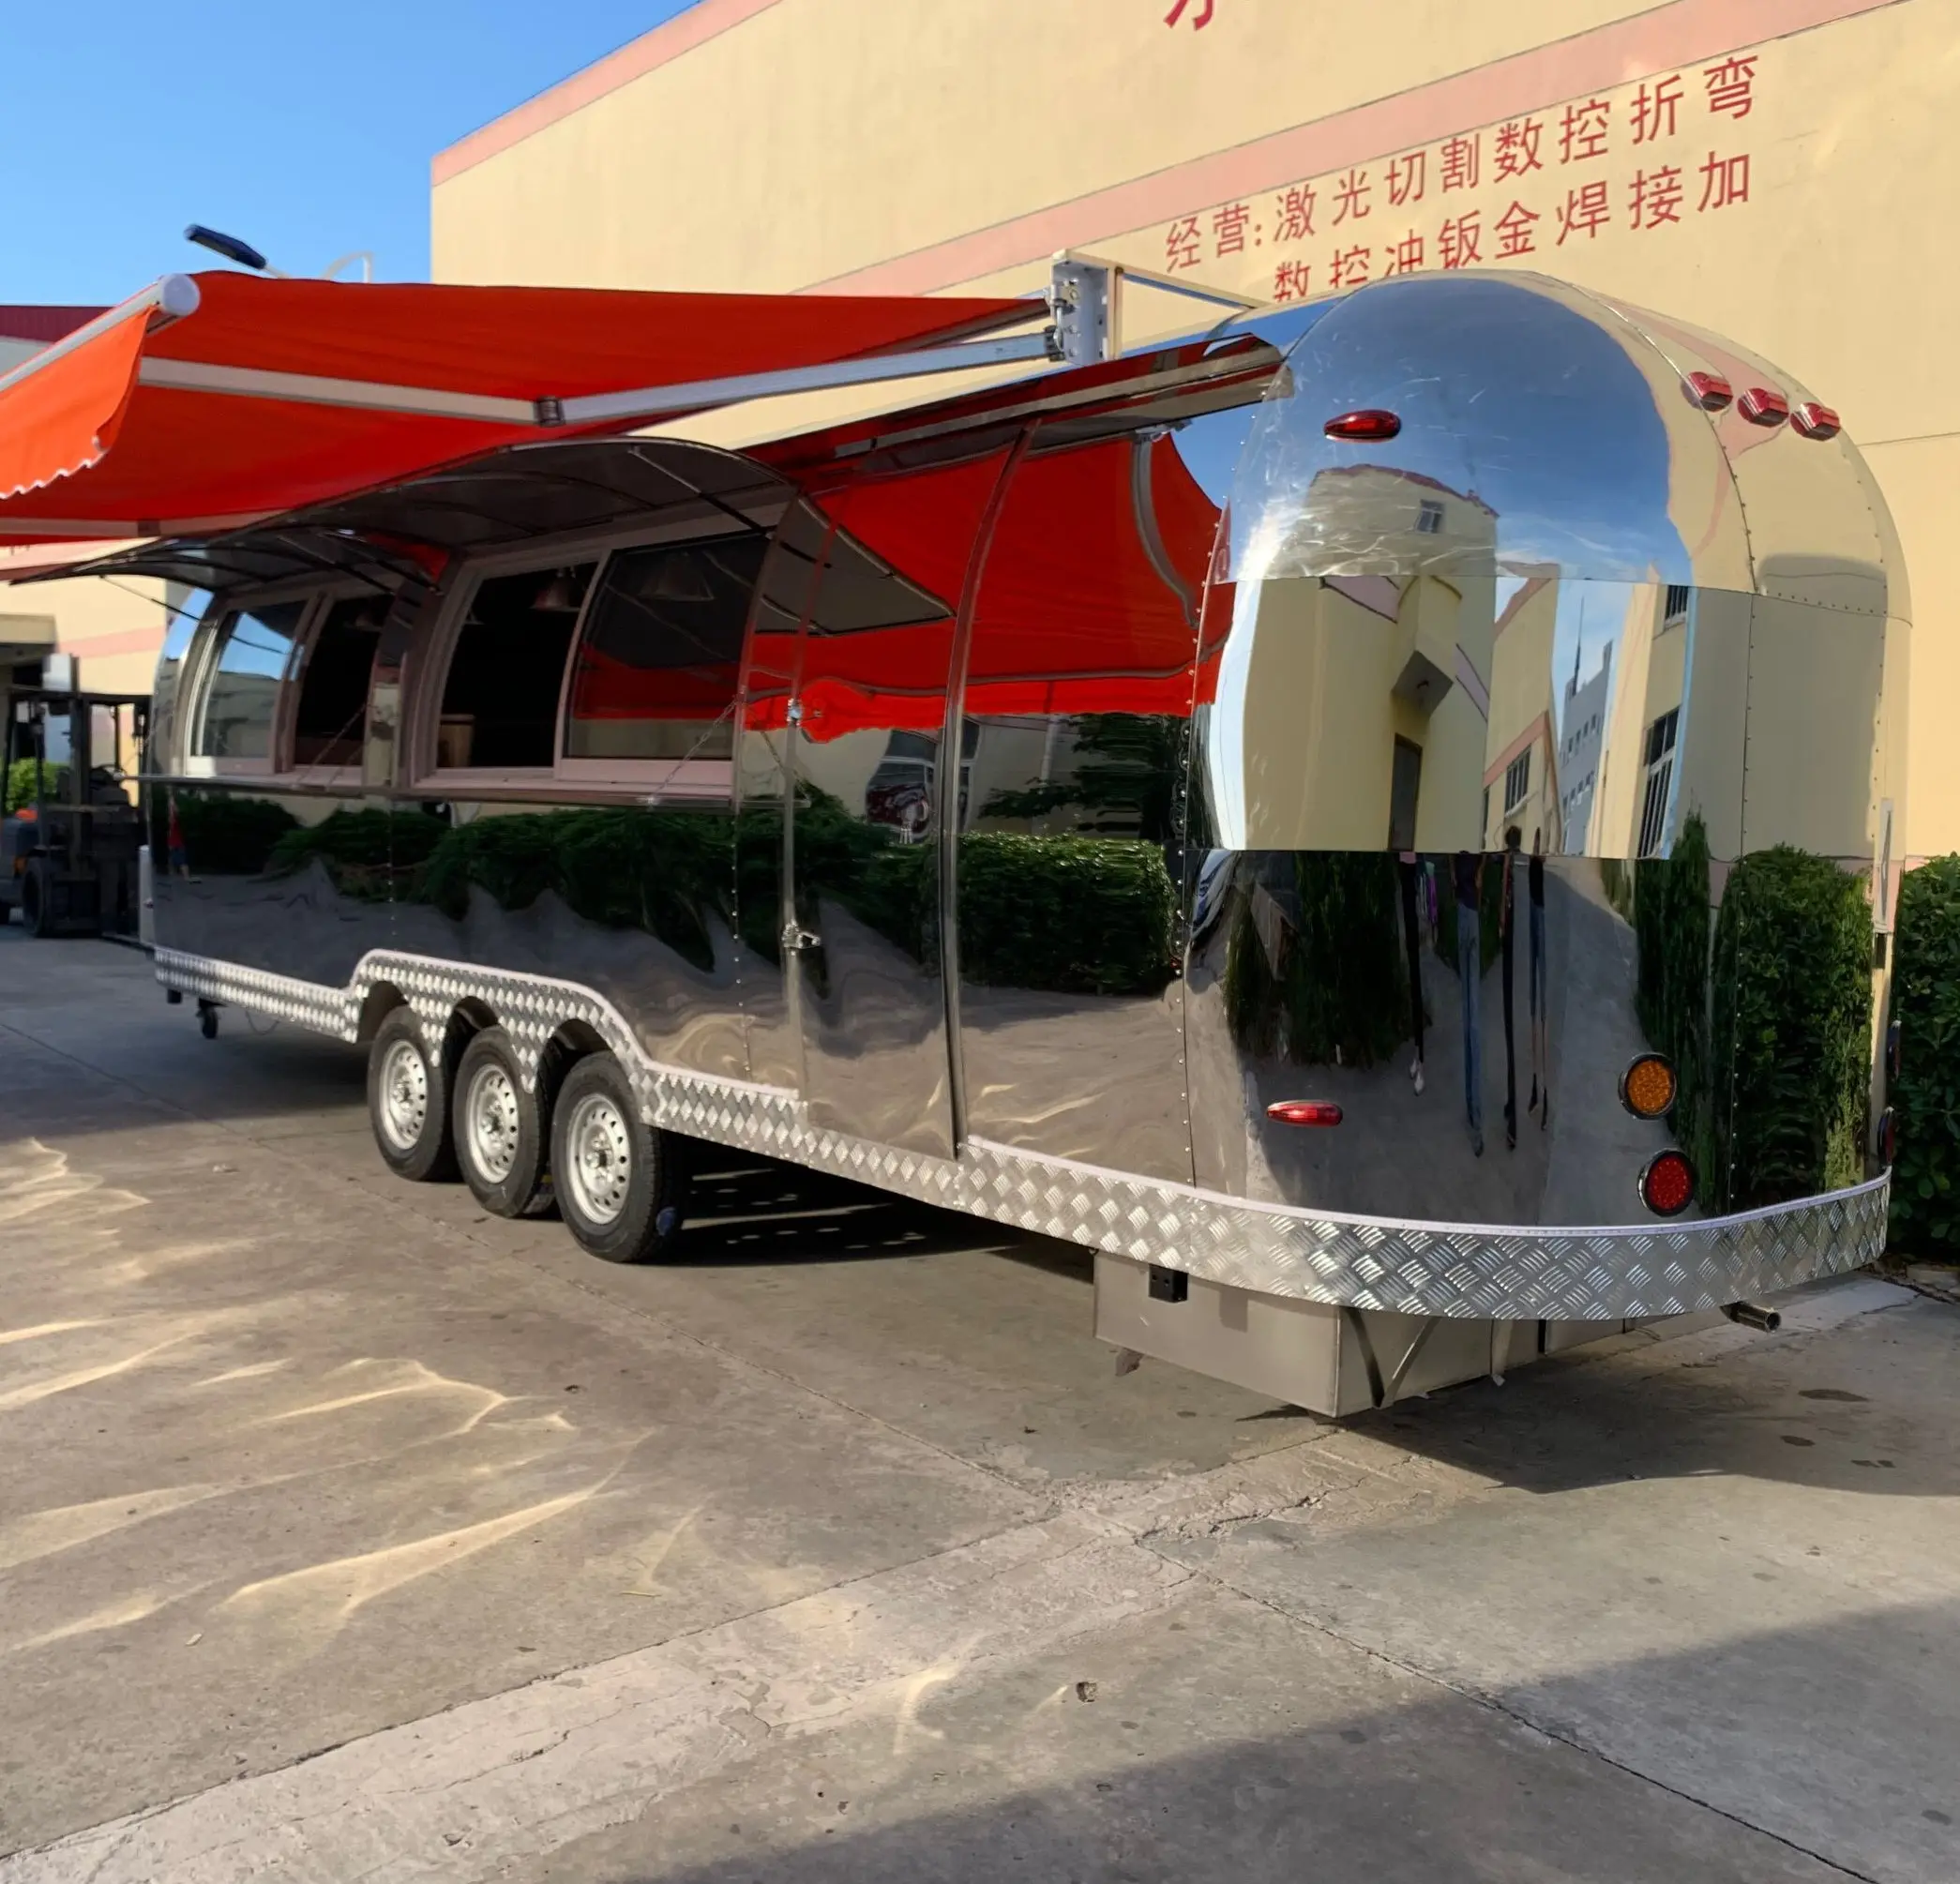 Mobile Van Air Stream Consession Trailer Airstream Food Trailer Stainless Steel Food Truck Large